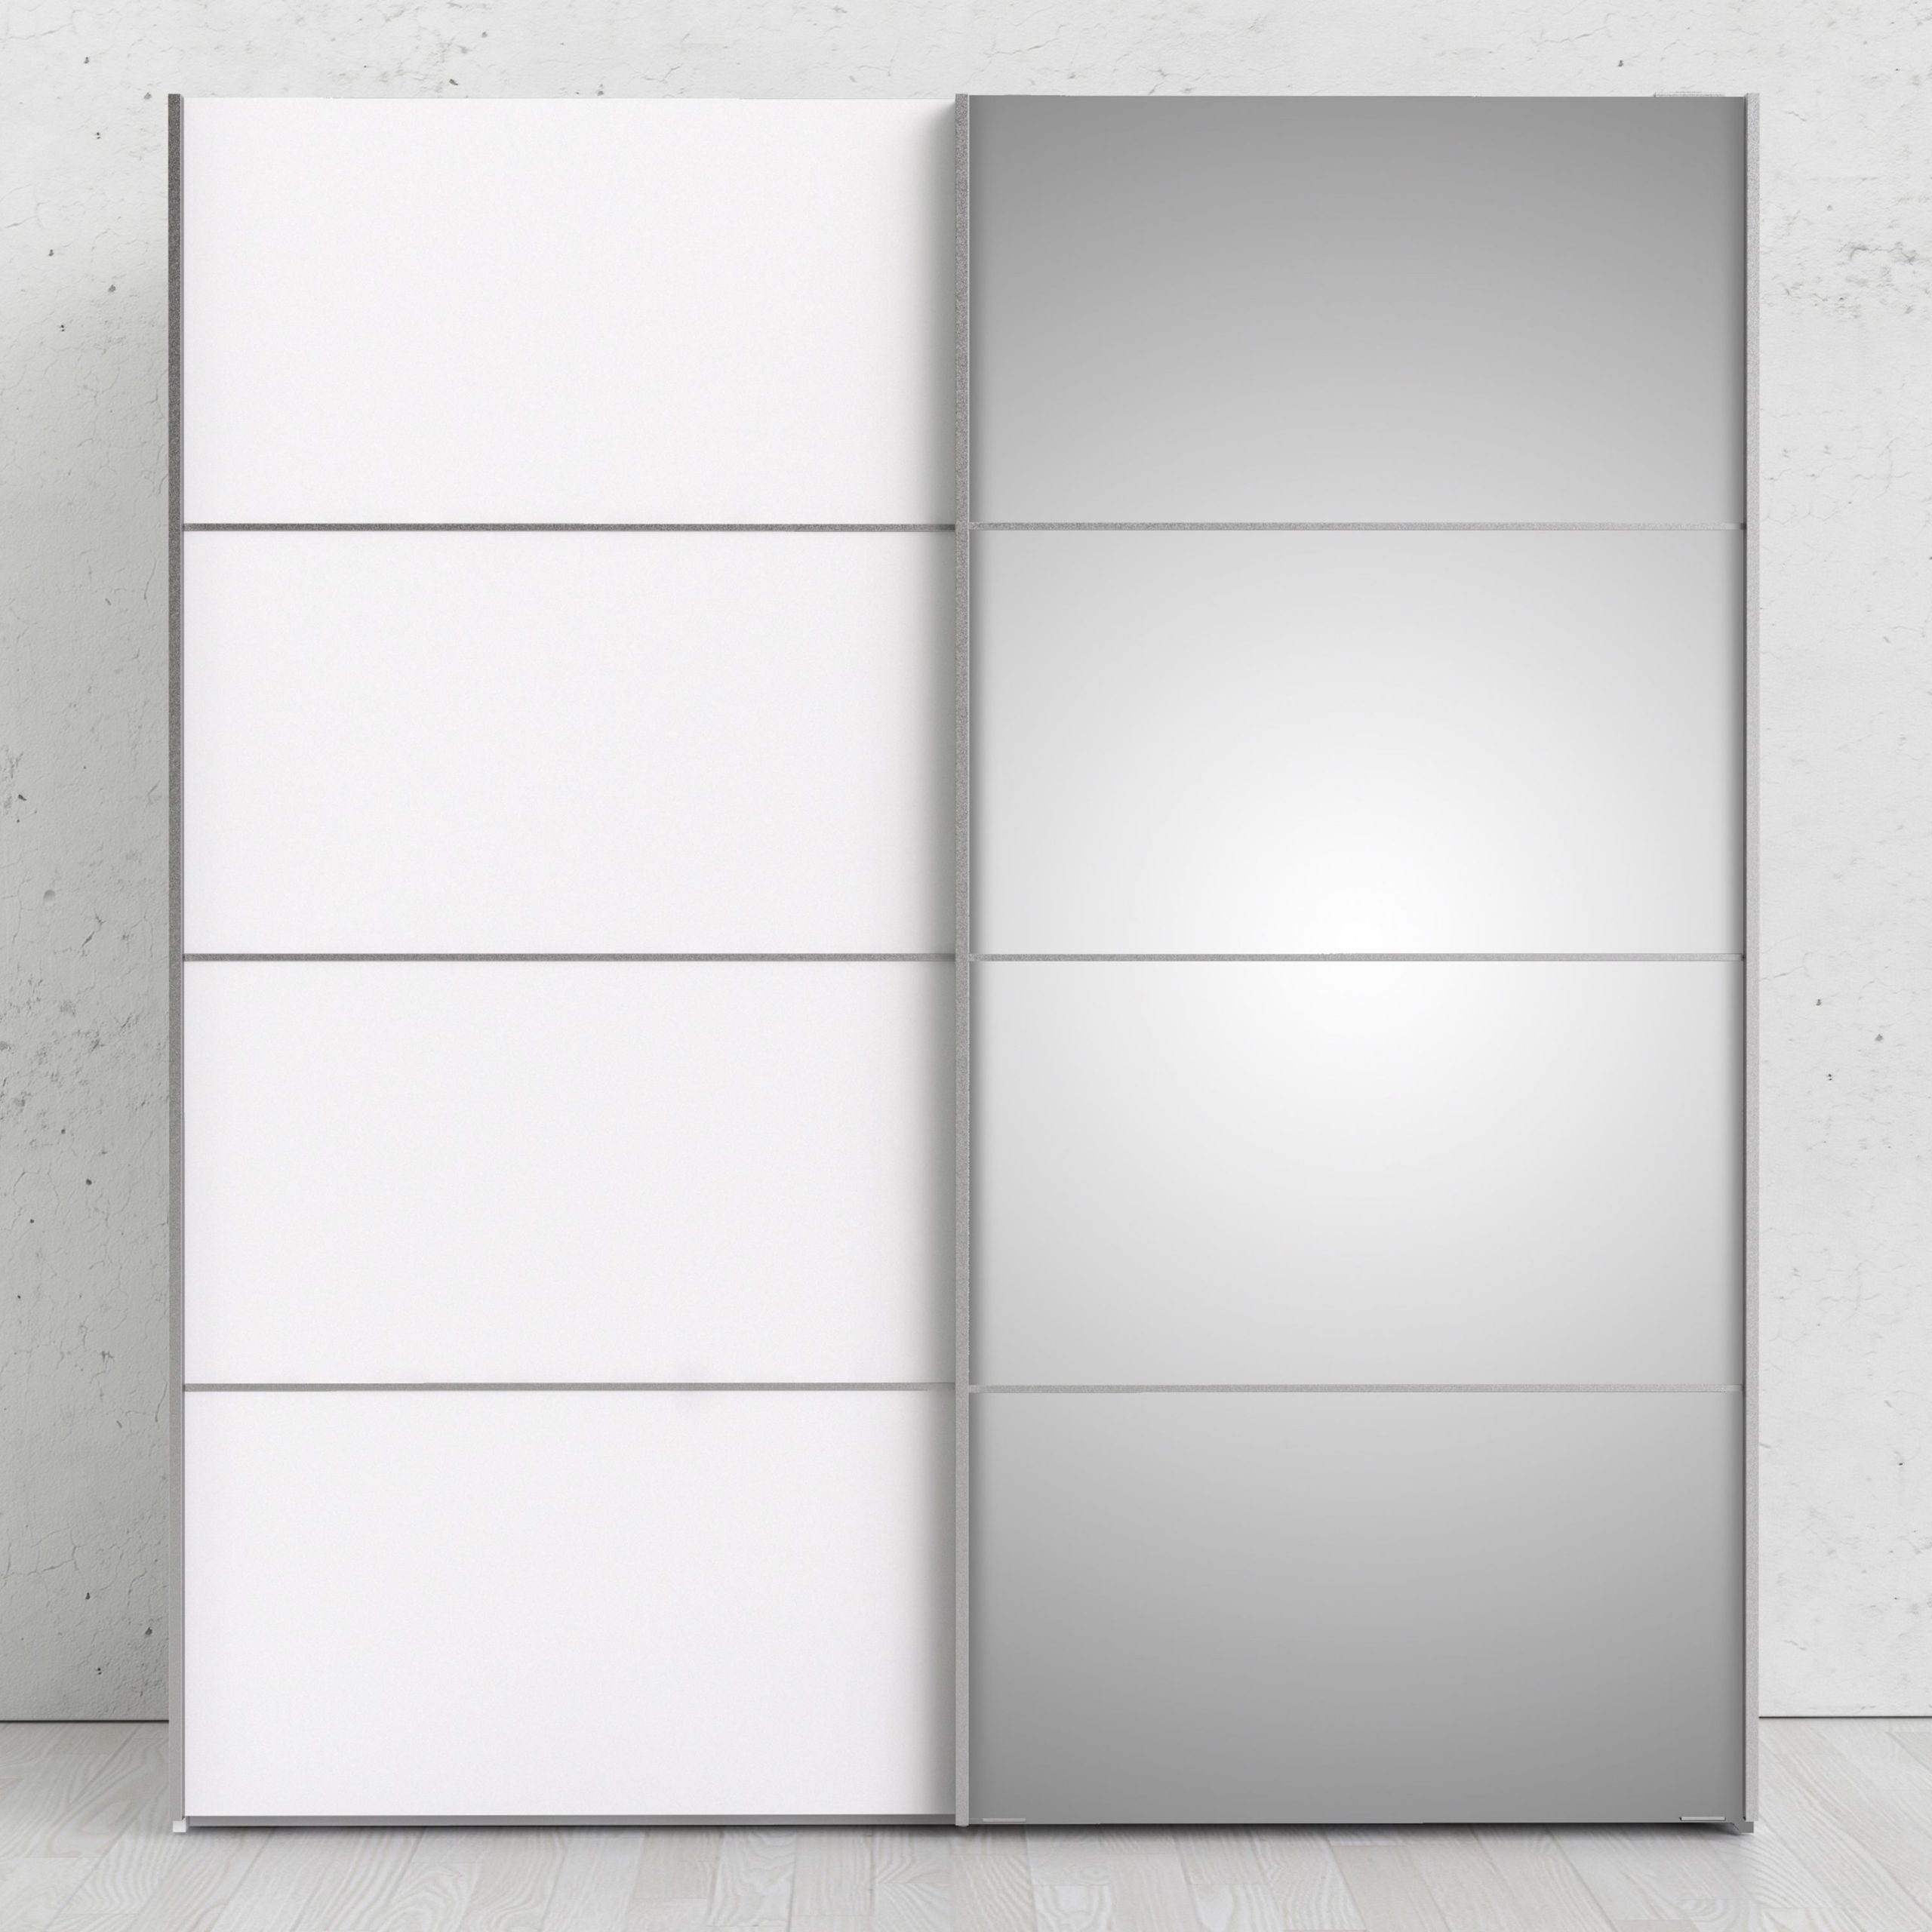 Verona Sliding Wardrobe 180cm In White With White And Mirror Doors With 5 Shelves